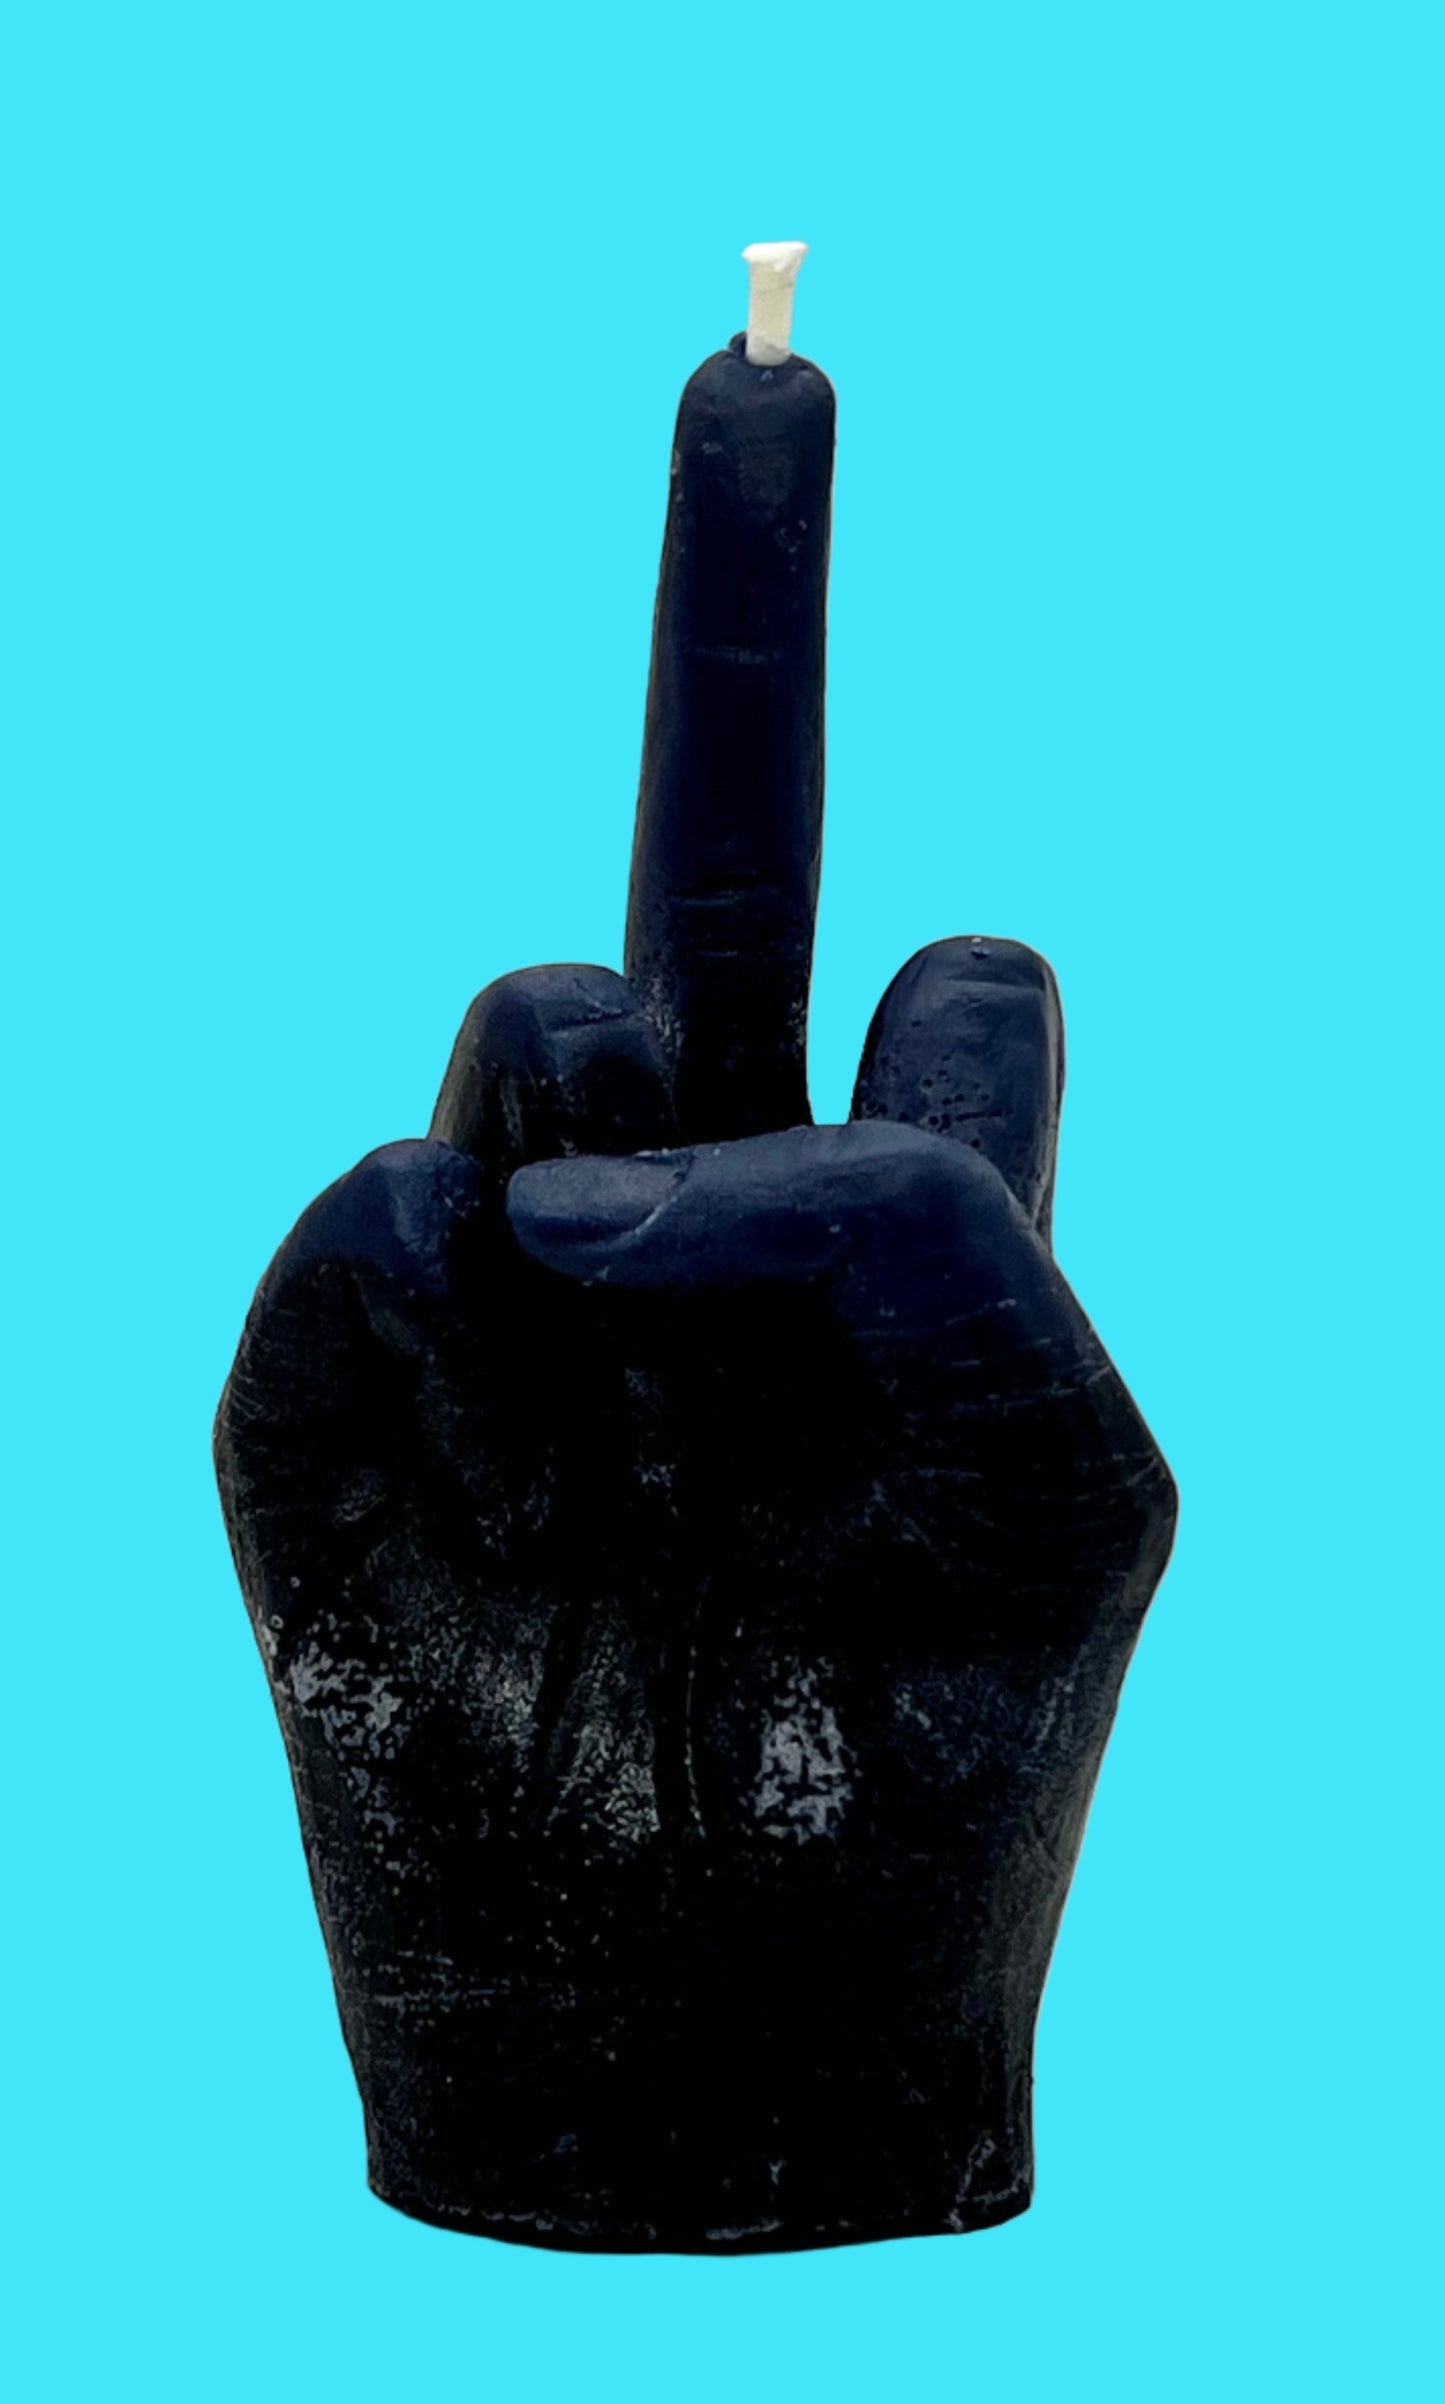 The Middle Finger